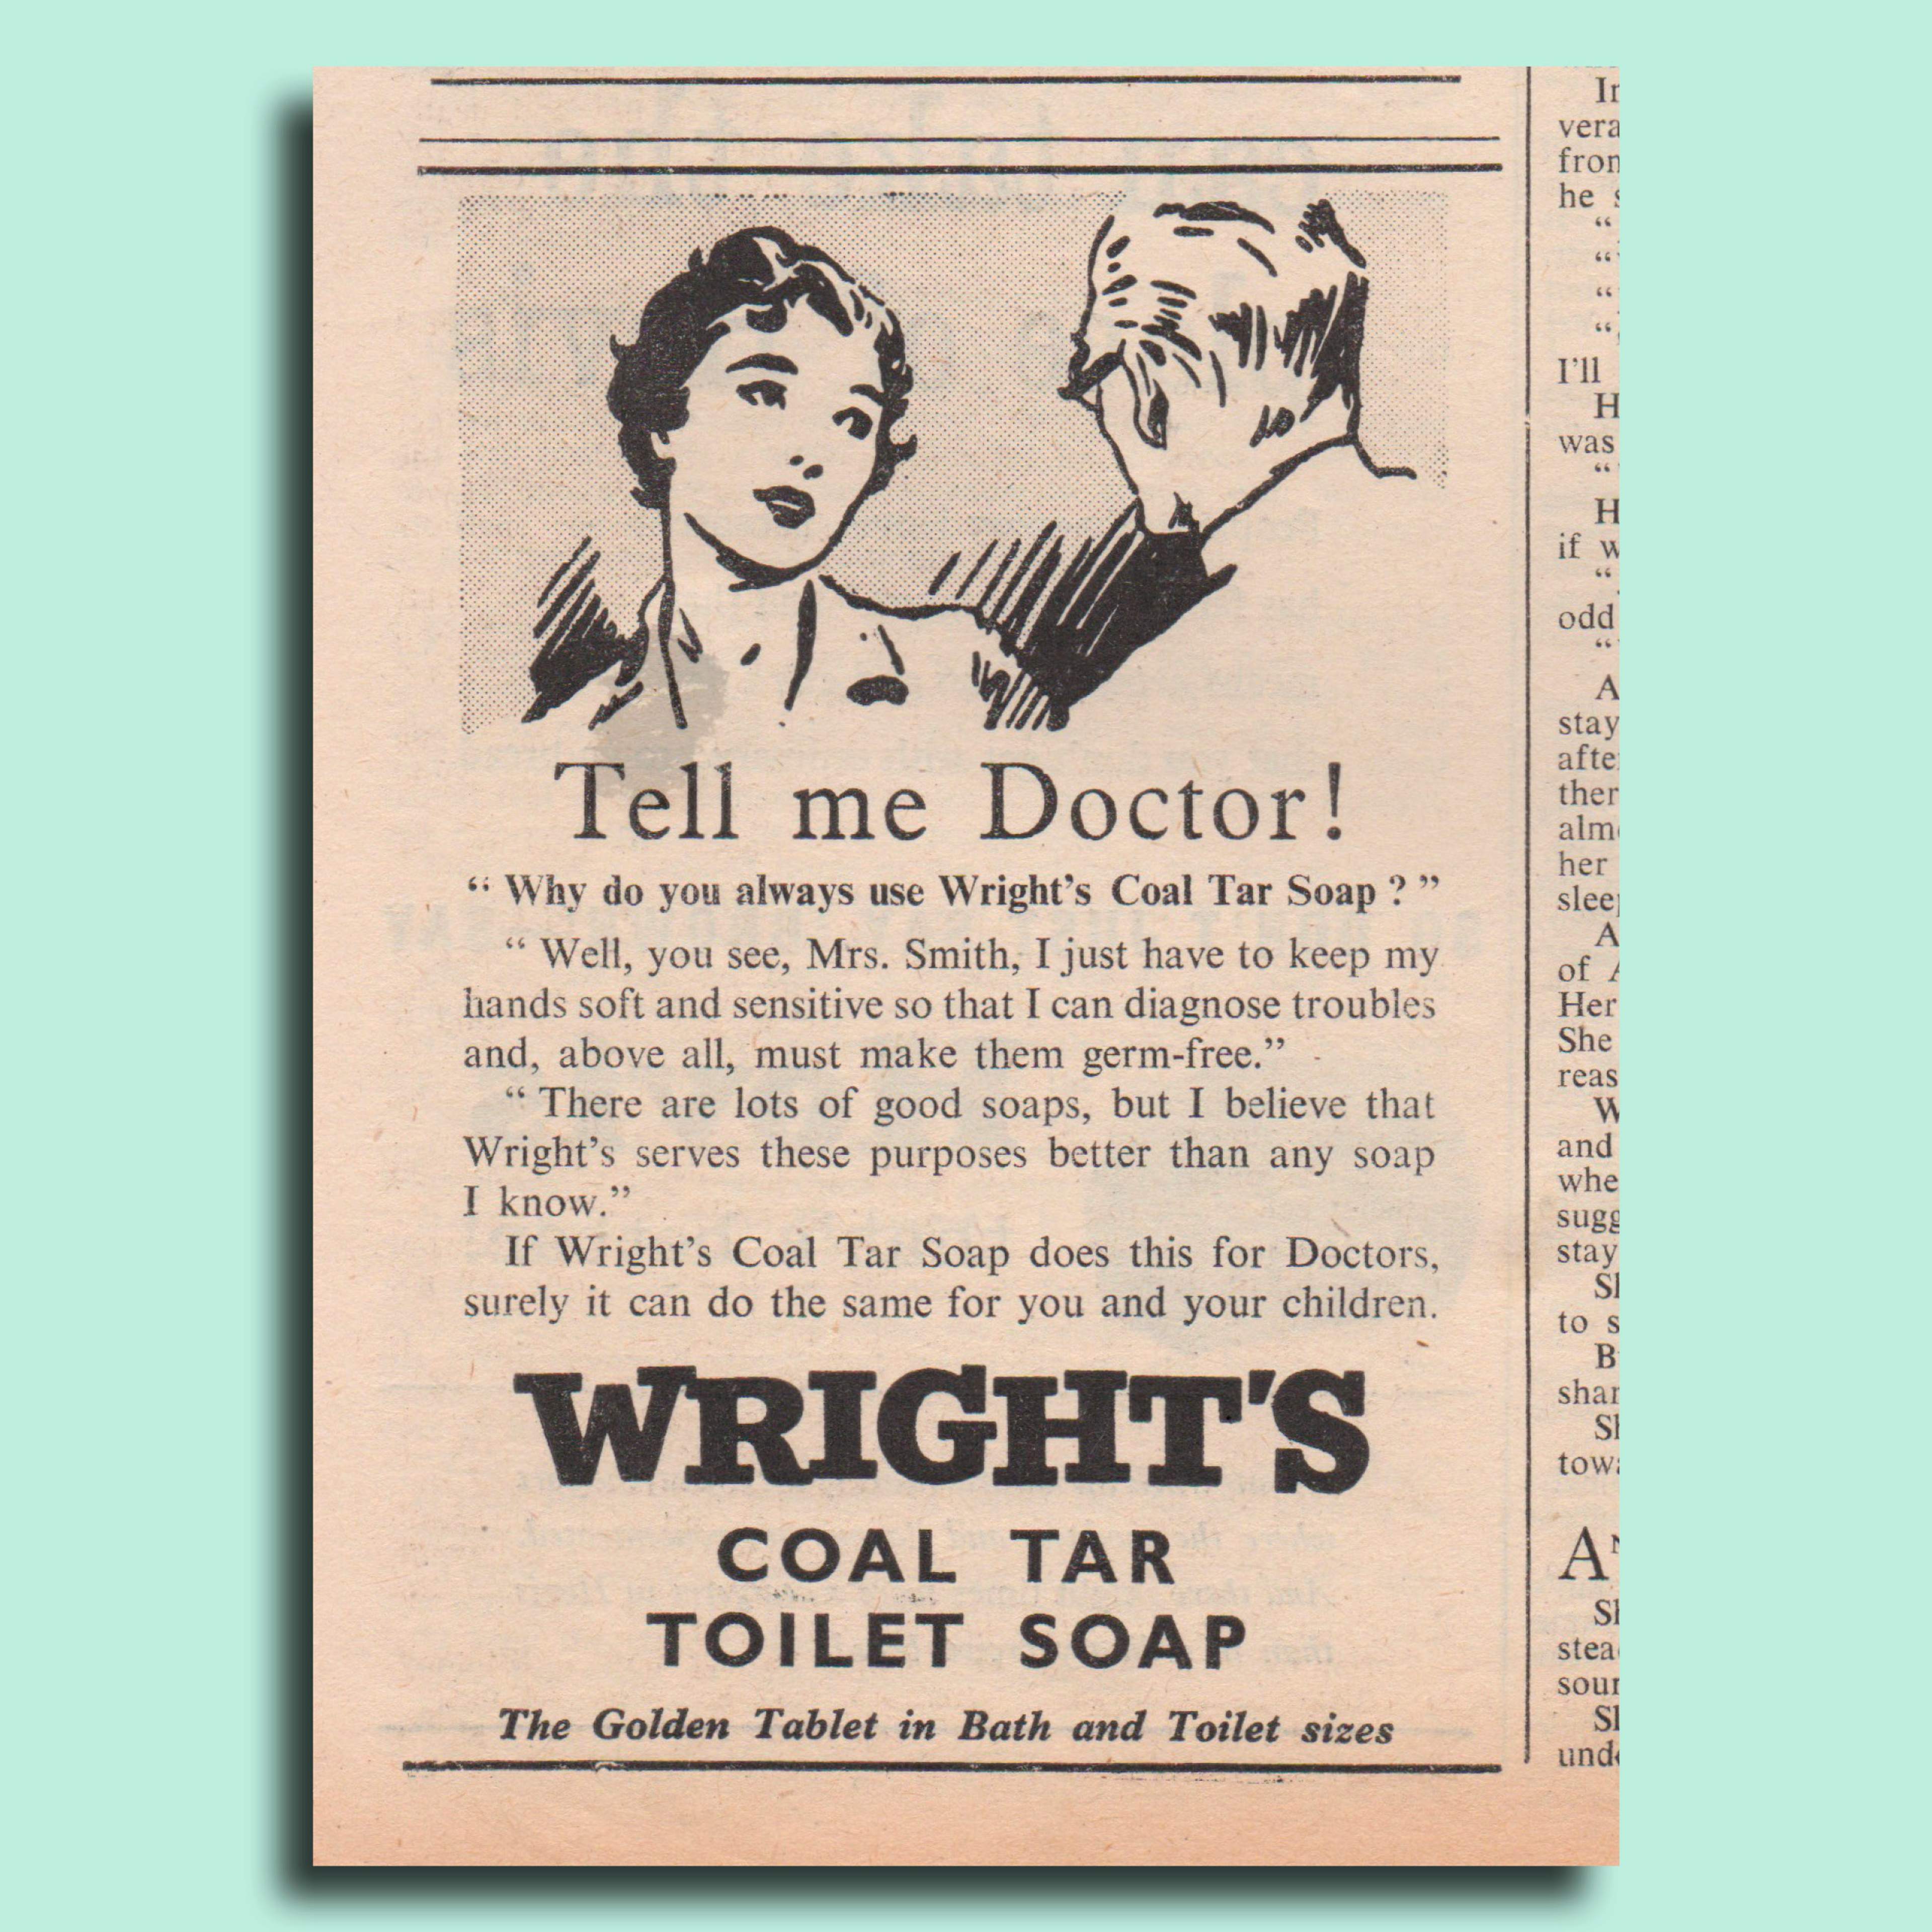 1959 Wright's Coal Tar Soap advert. Black and white illustration of a female patient talking to her doctor.